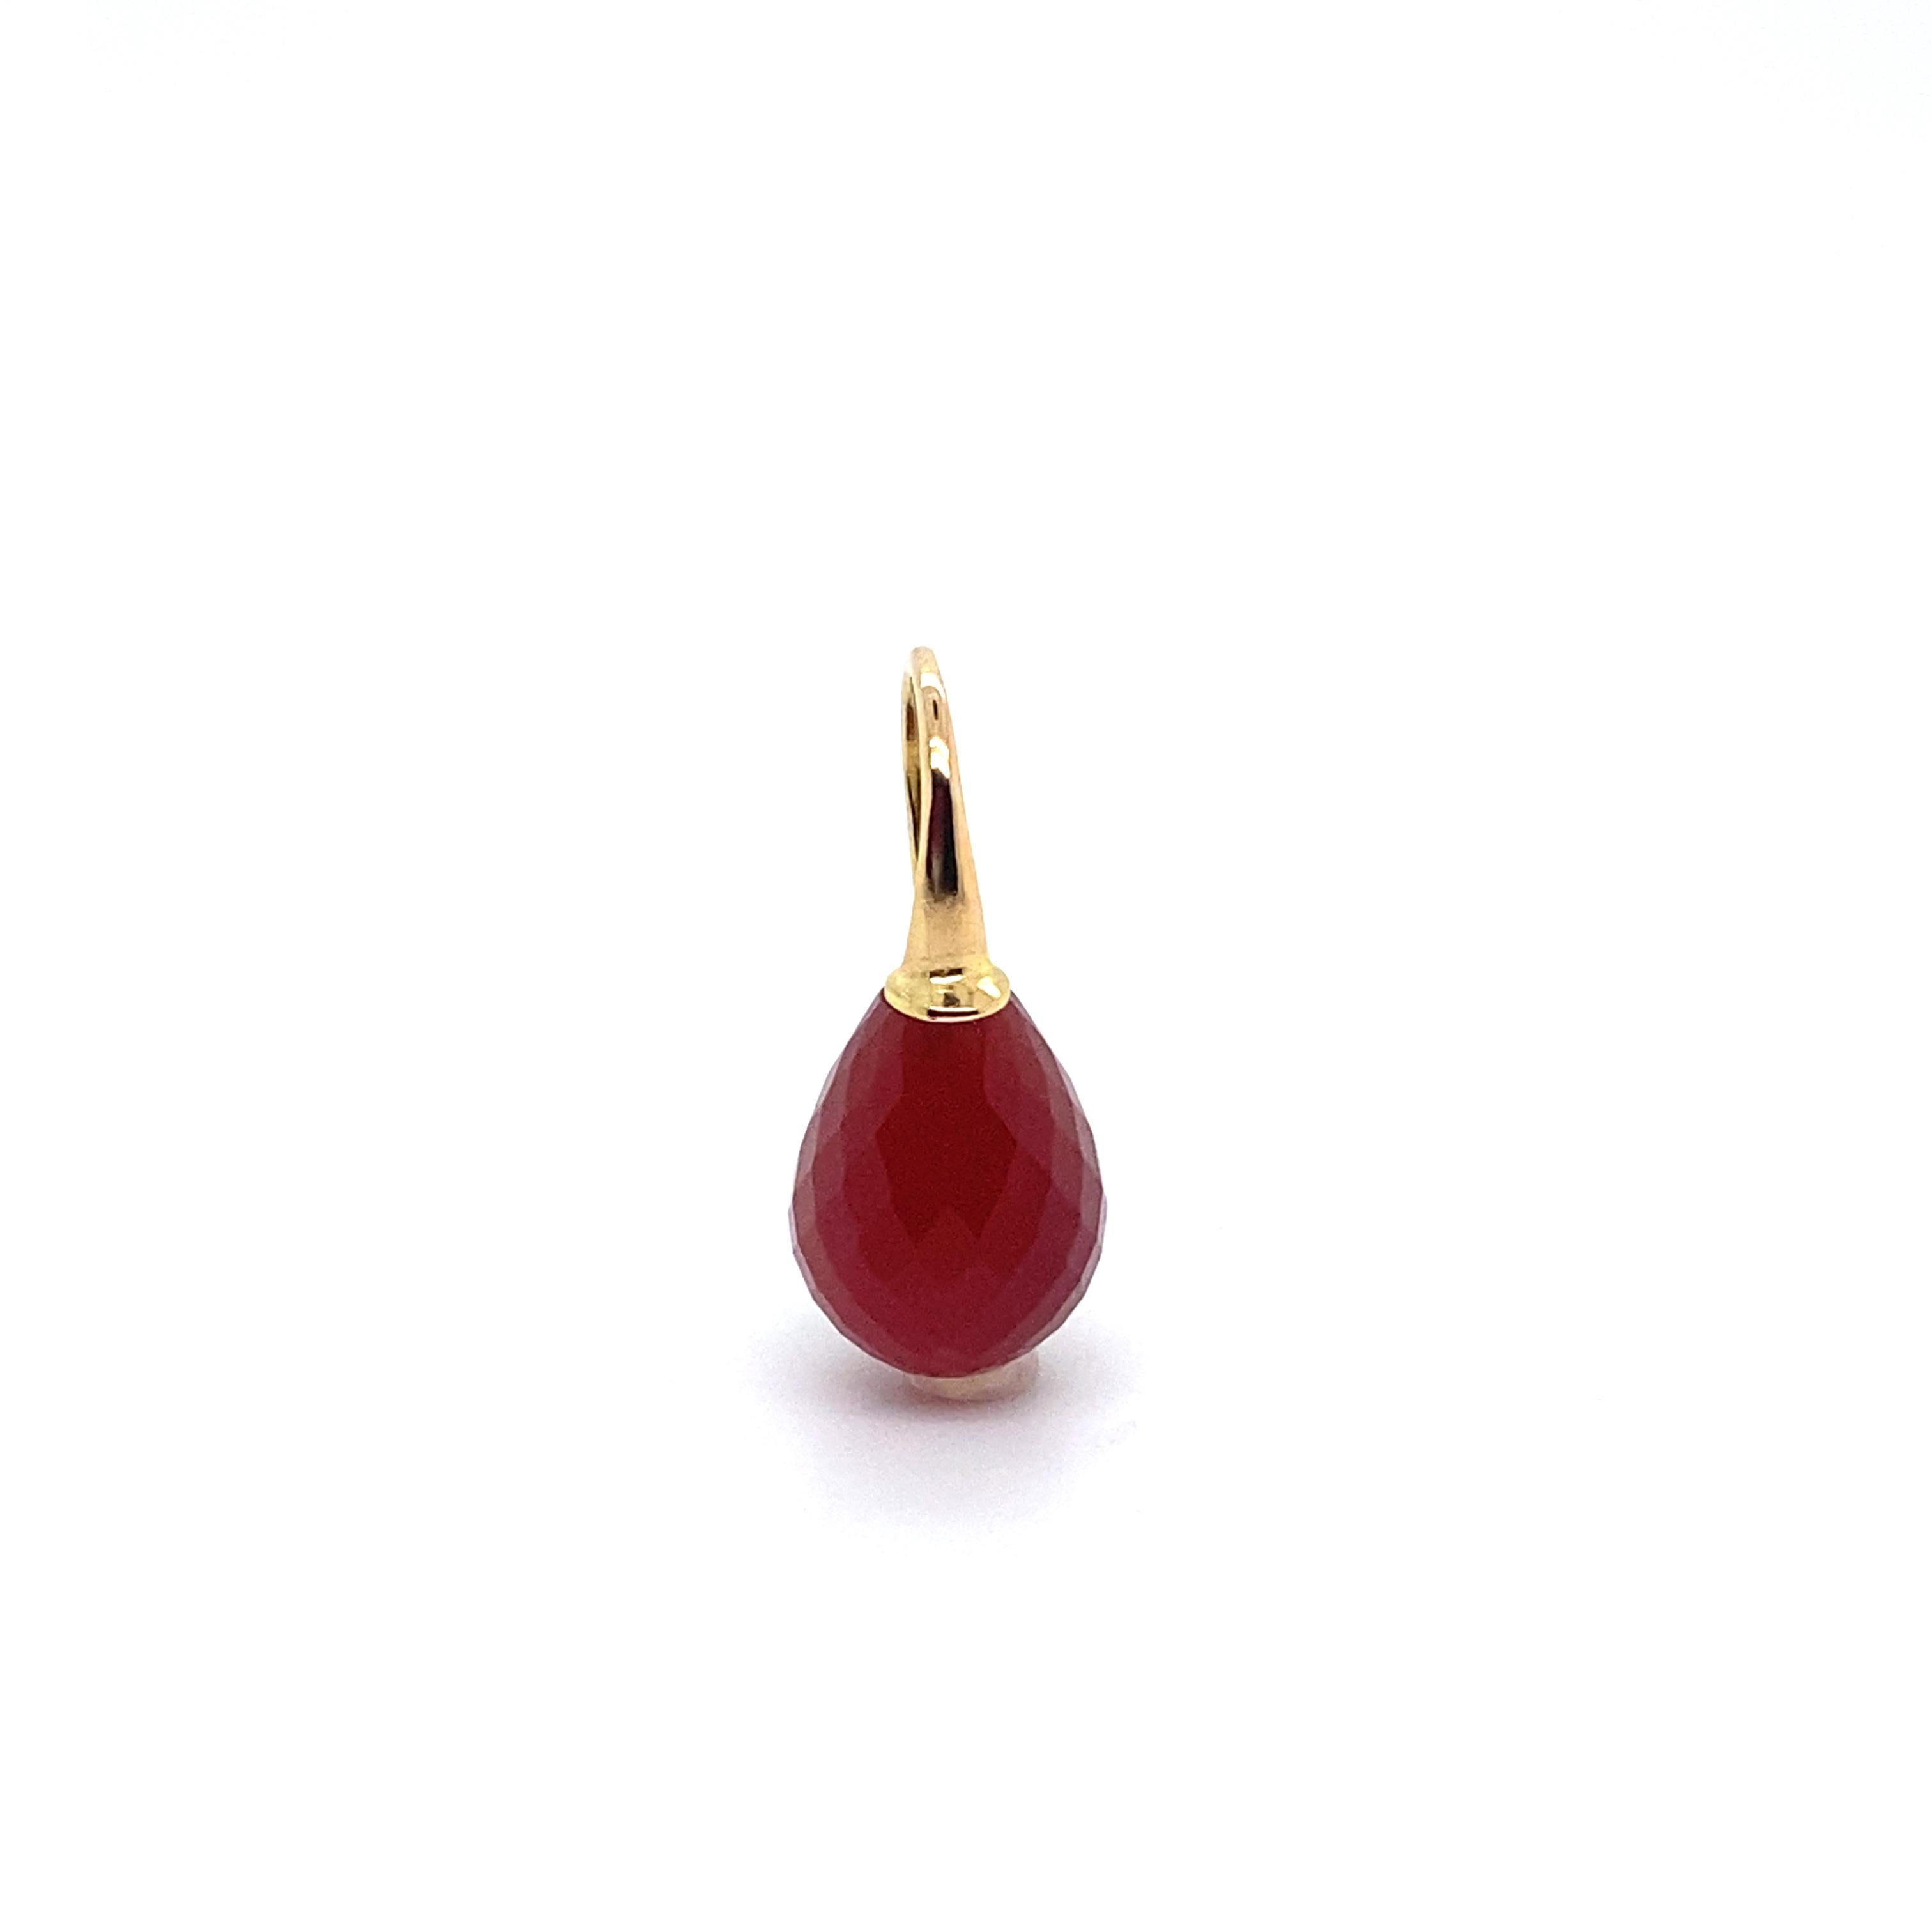 18 Carat Gold Earring with a Red Agate Briolette Cut For Sale 4